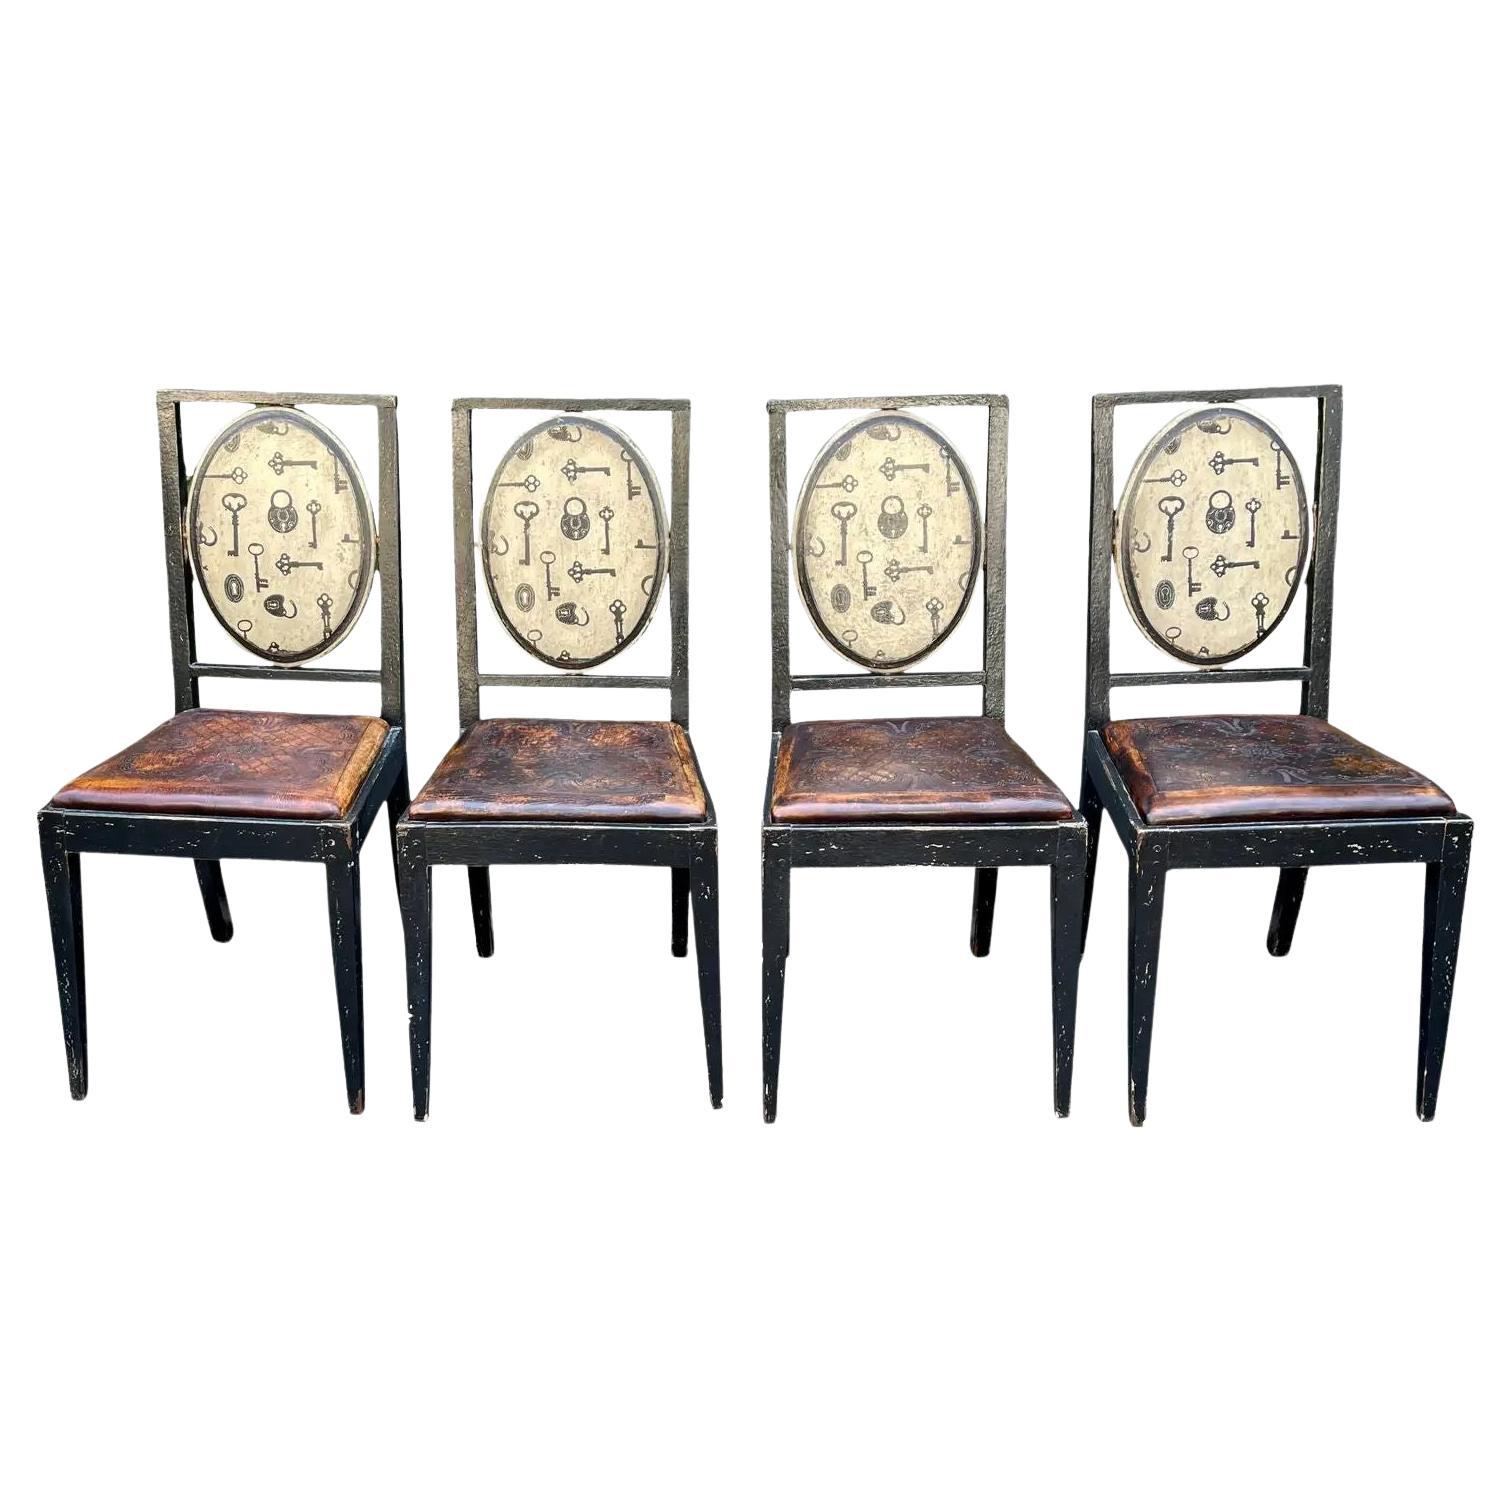 Set of 4 Equator Furniture Company Rustic Tooled Leather Painted Chair, 1990s For Sale